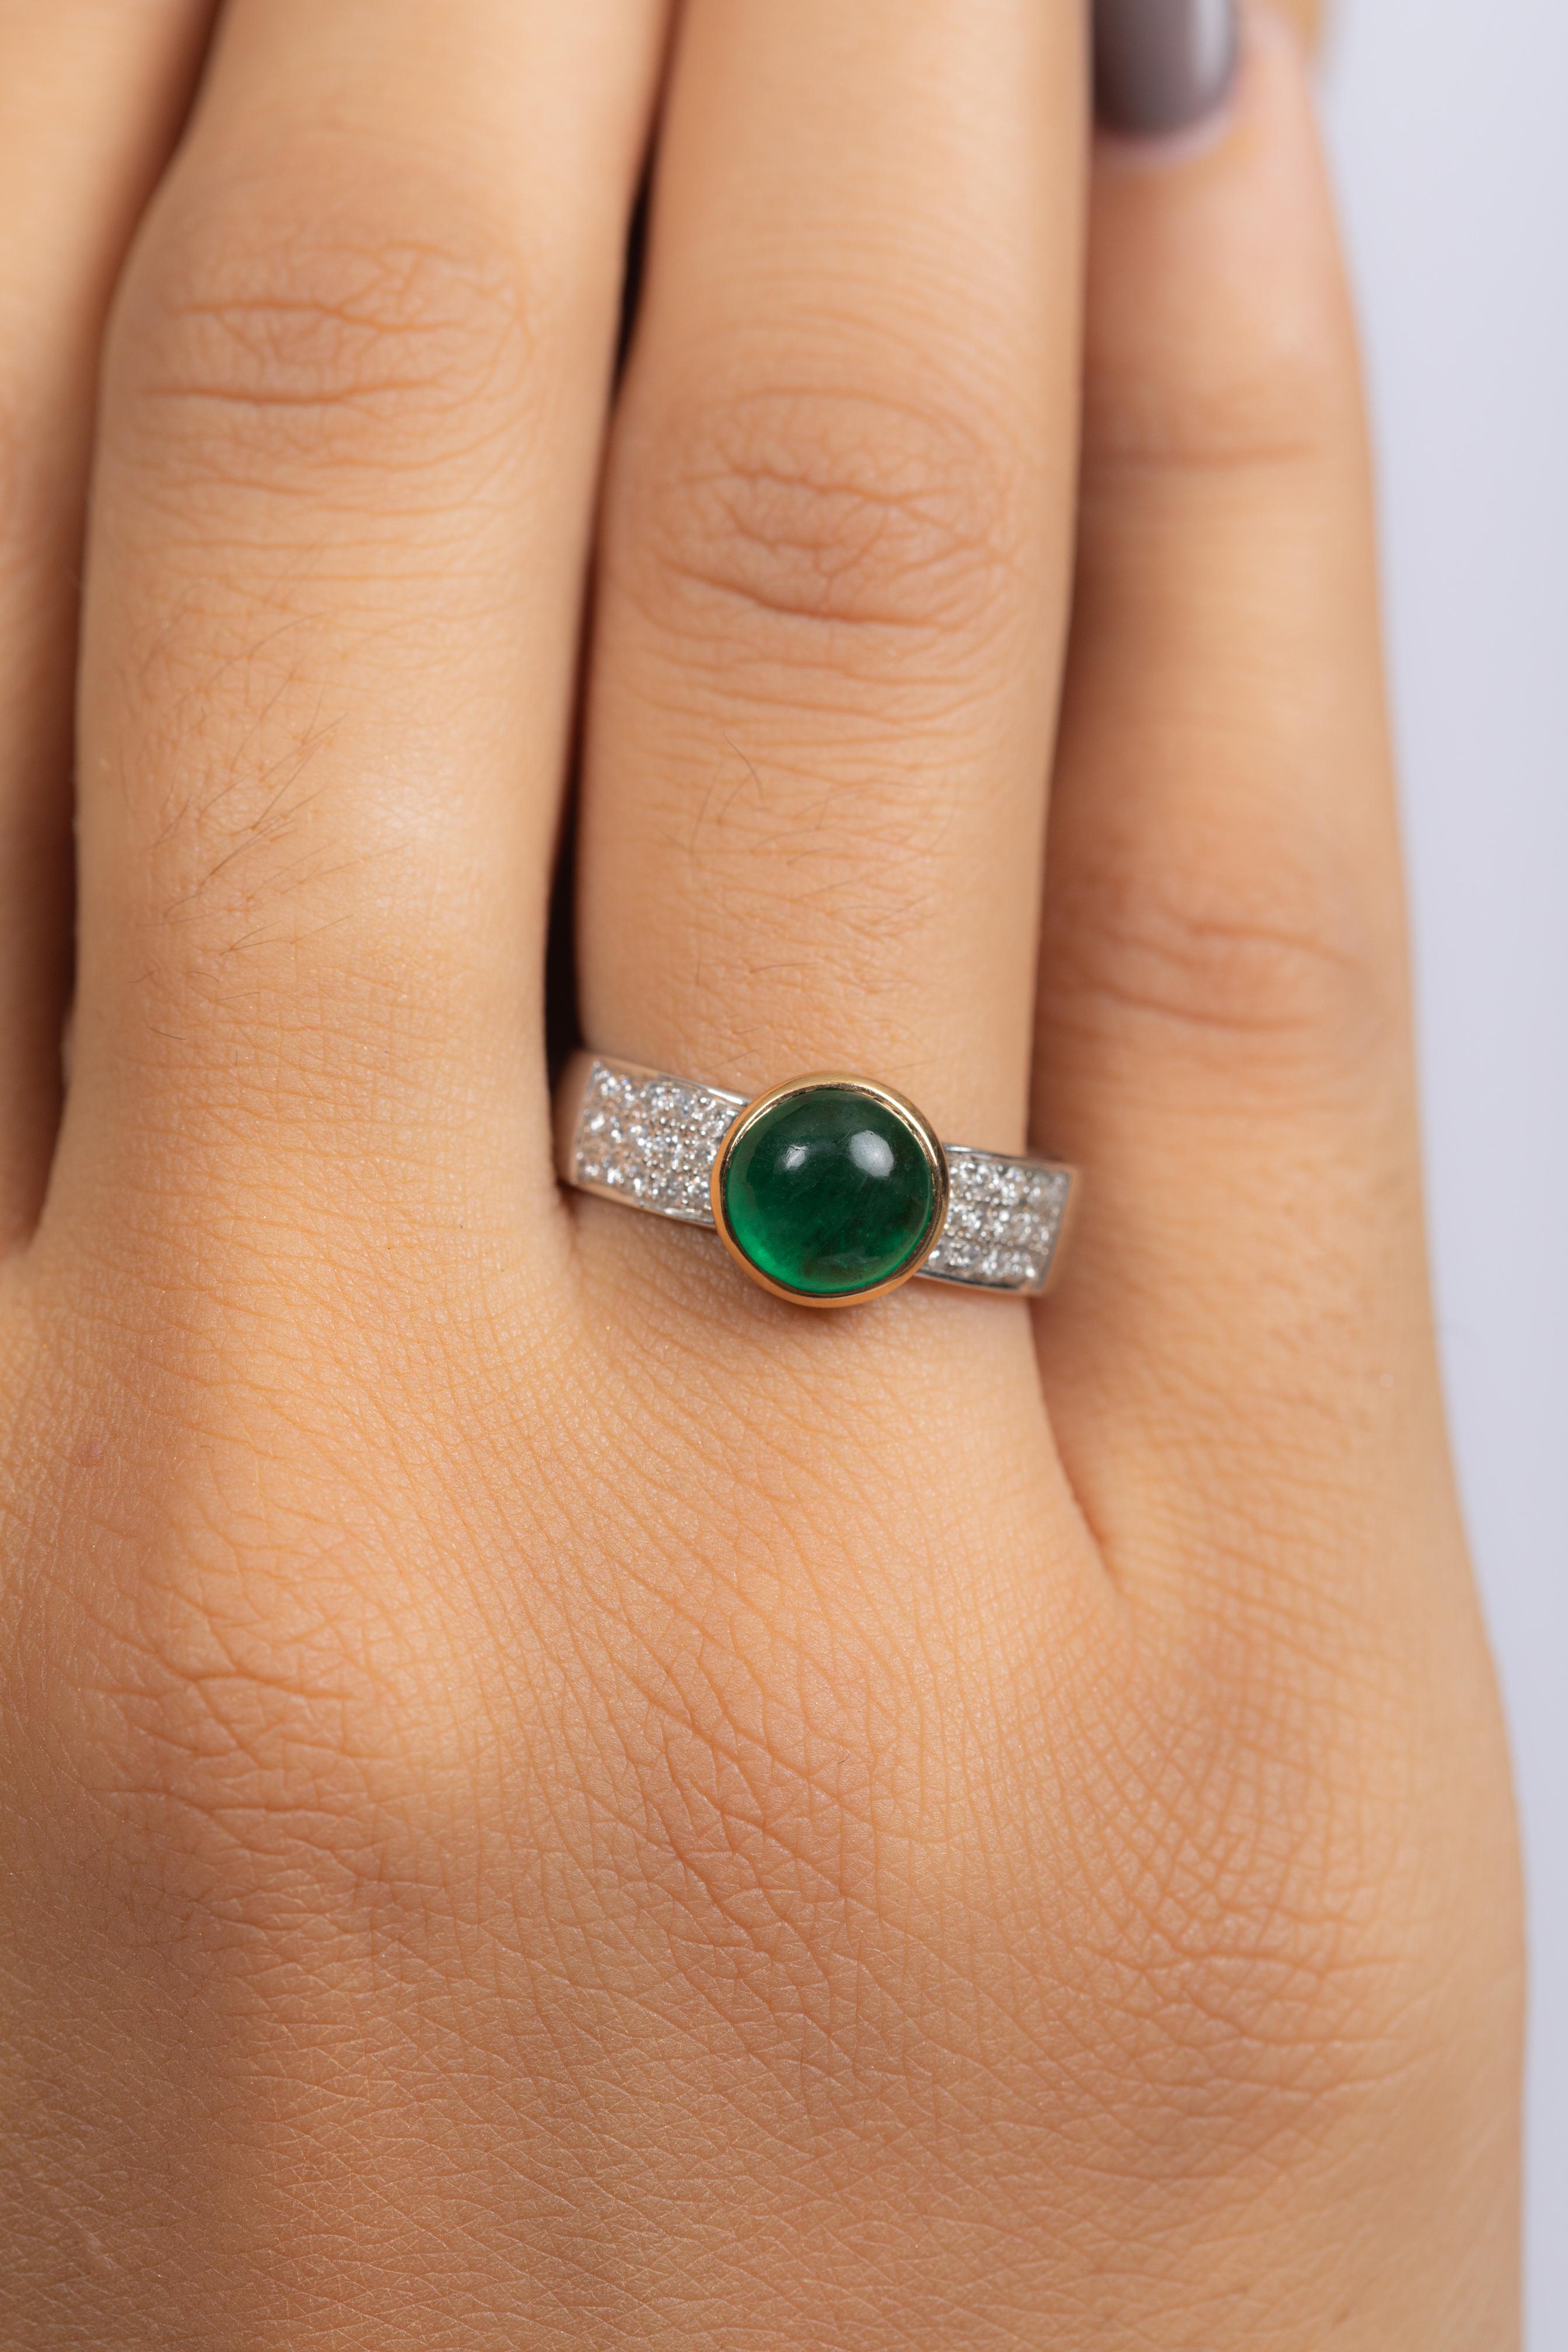 For Sale:  1.72 Carat Emerald and Diamond Ring in 18K White Gold  2